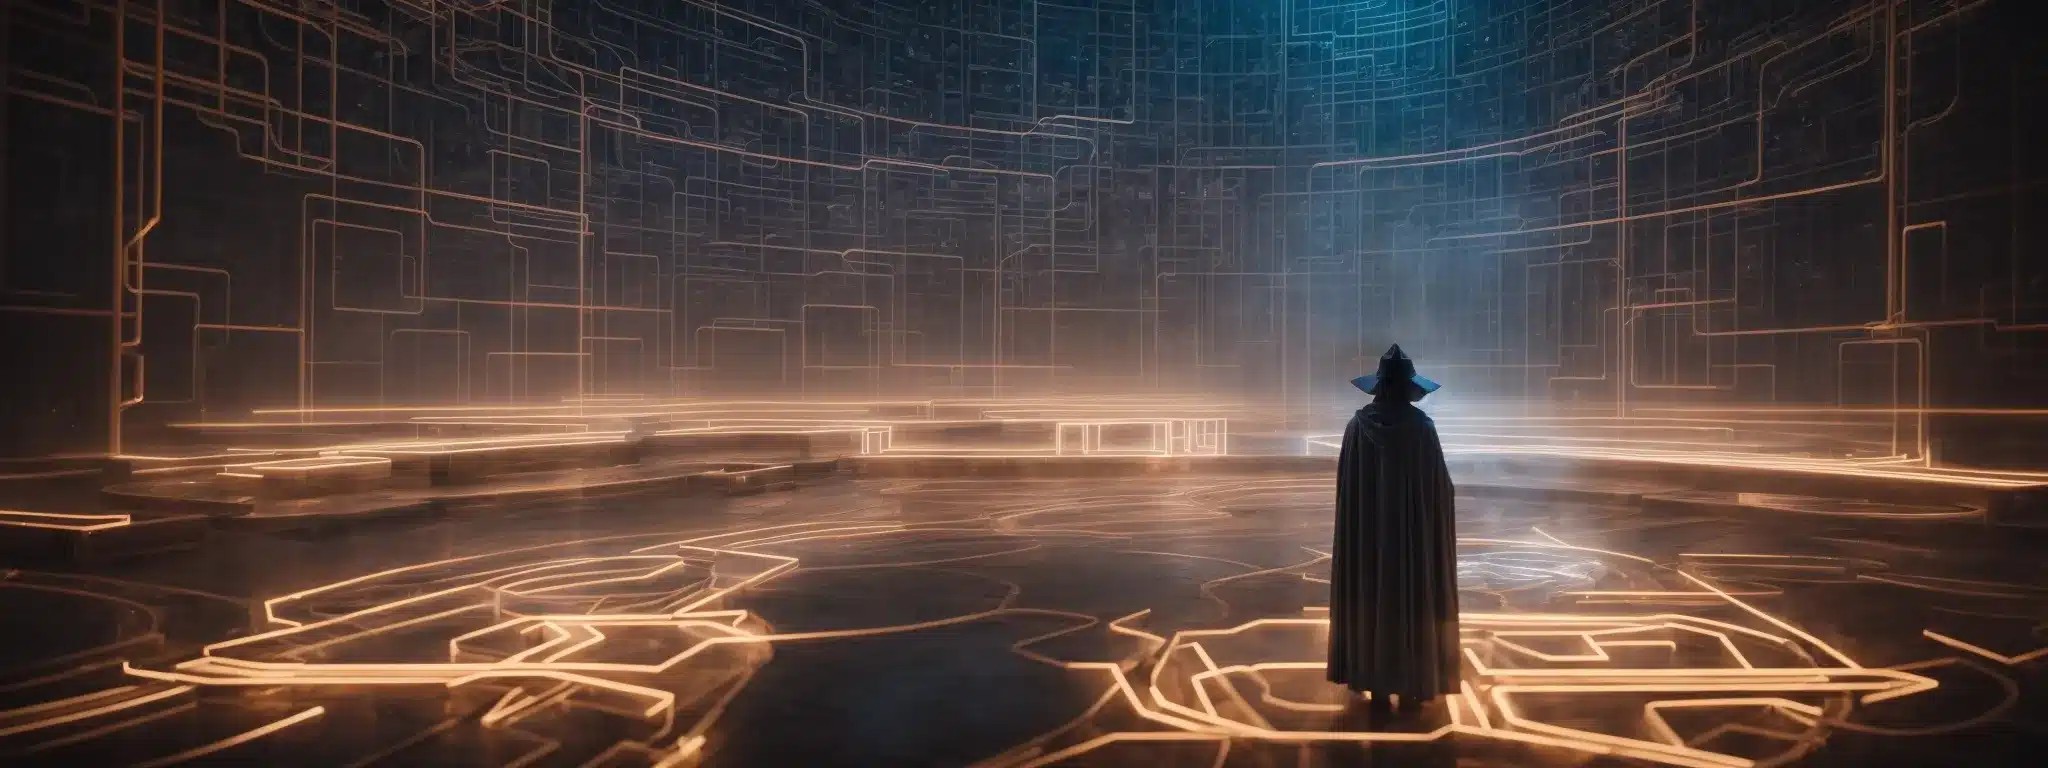 A Wizard-Like Figure Stands Before A Glowing Console, Casting Light Over A Maze-Like Network Representing A Wordpress Site.